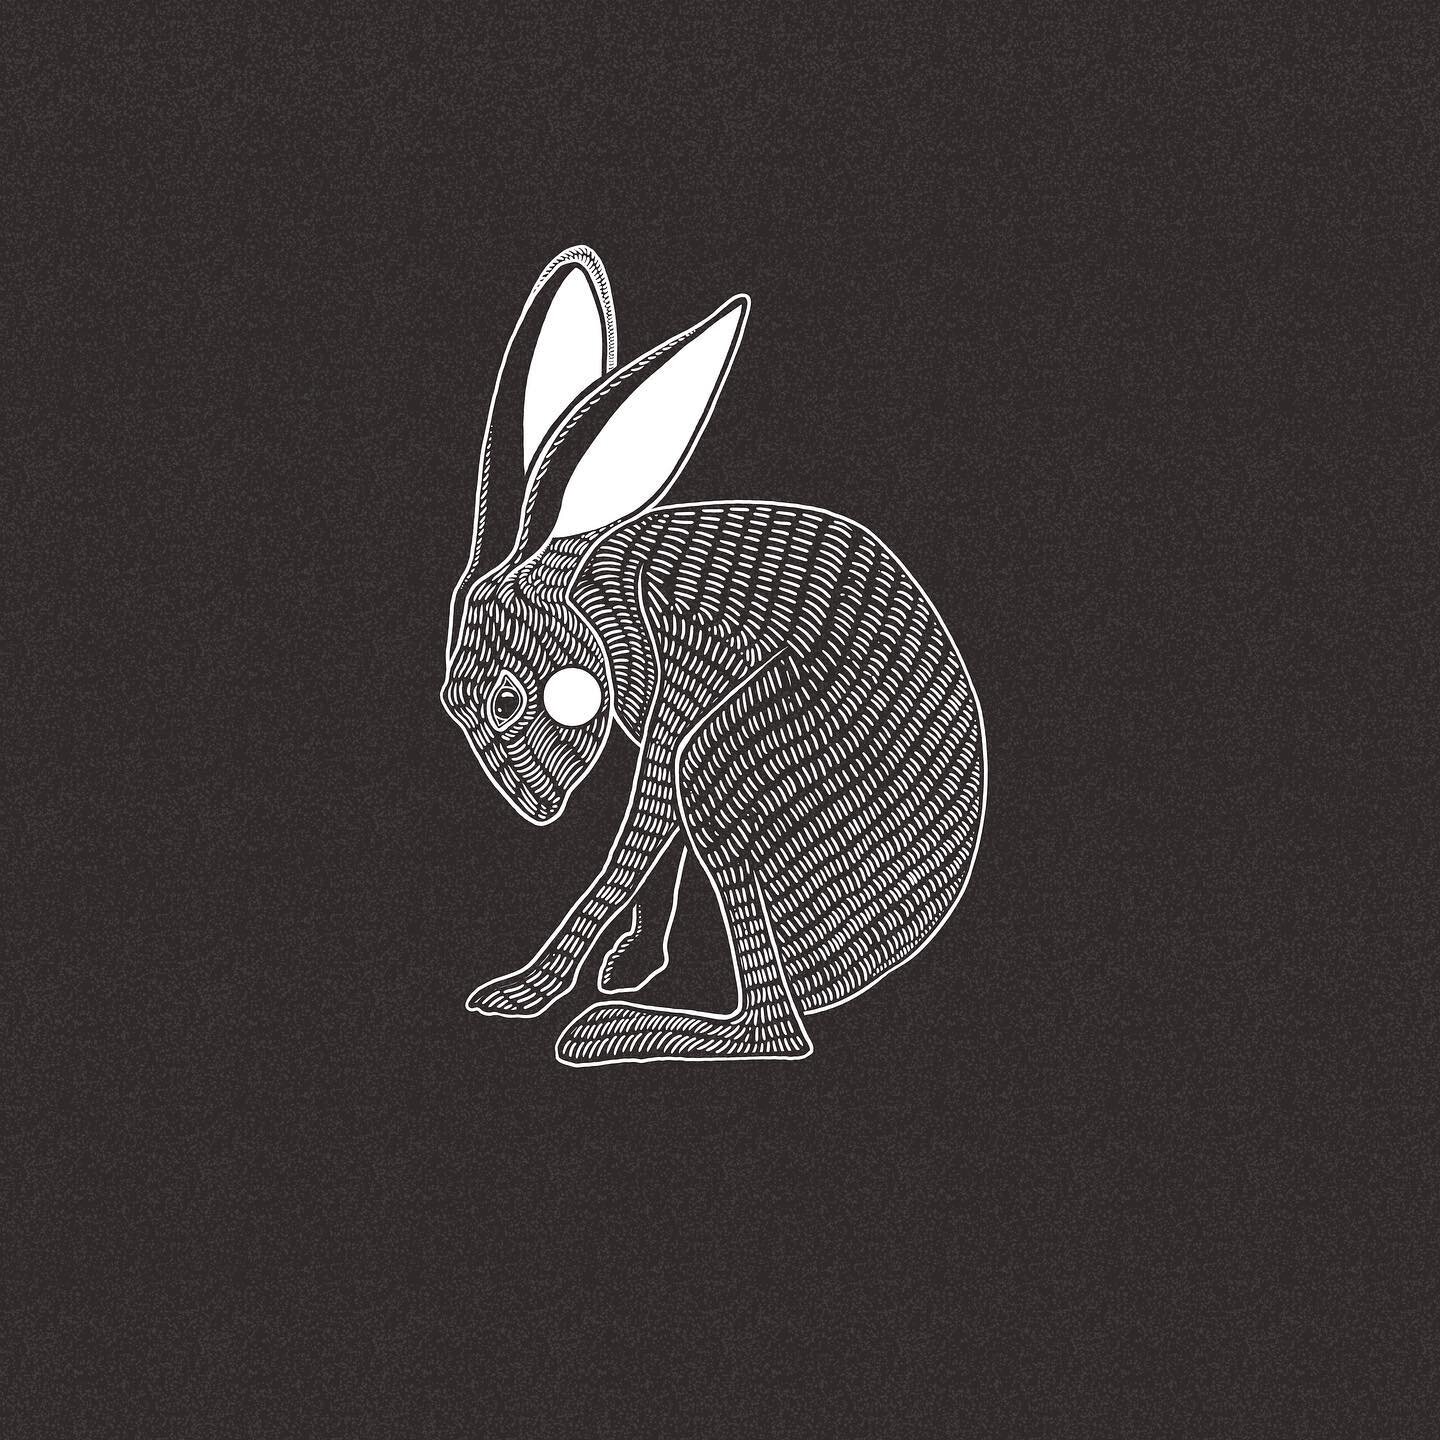 Good morning, world. I hope you love this hare as much as I do. ✨ #womenofillustration